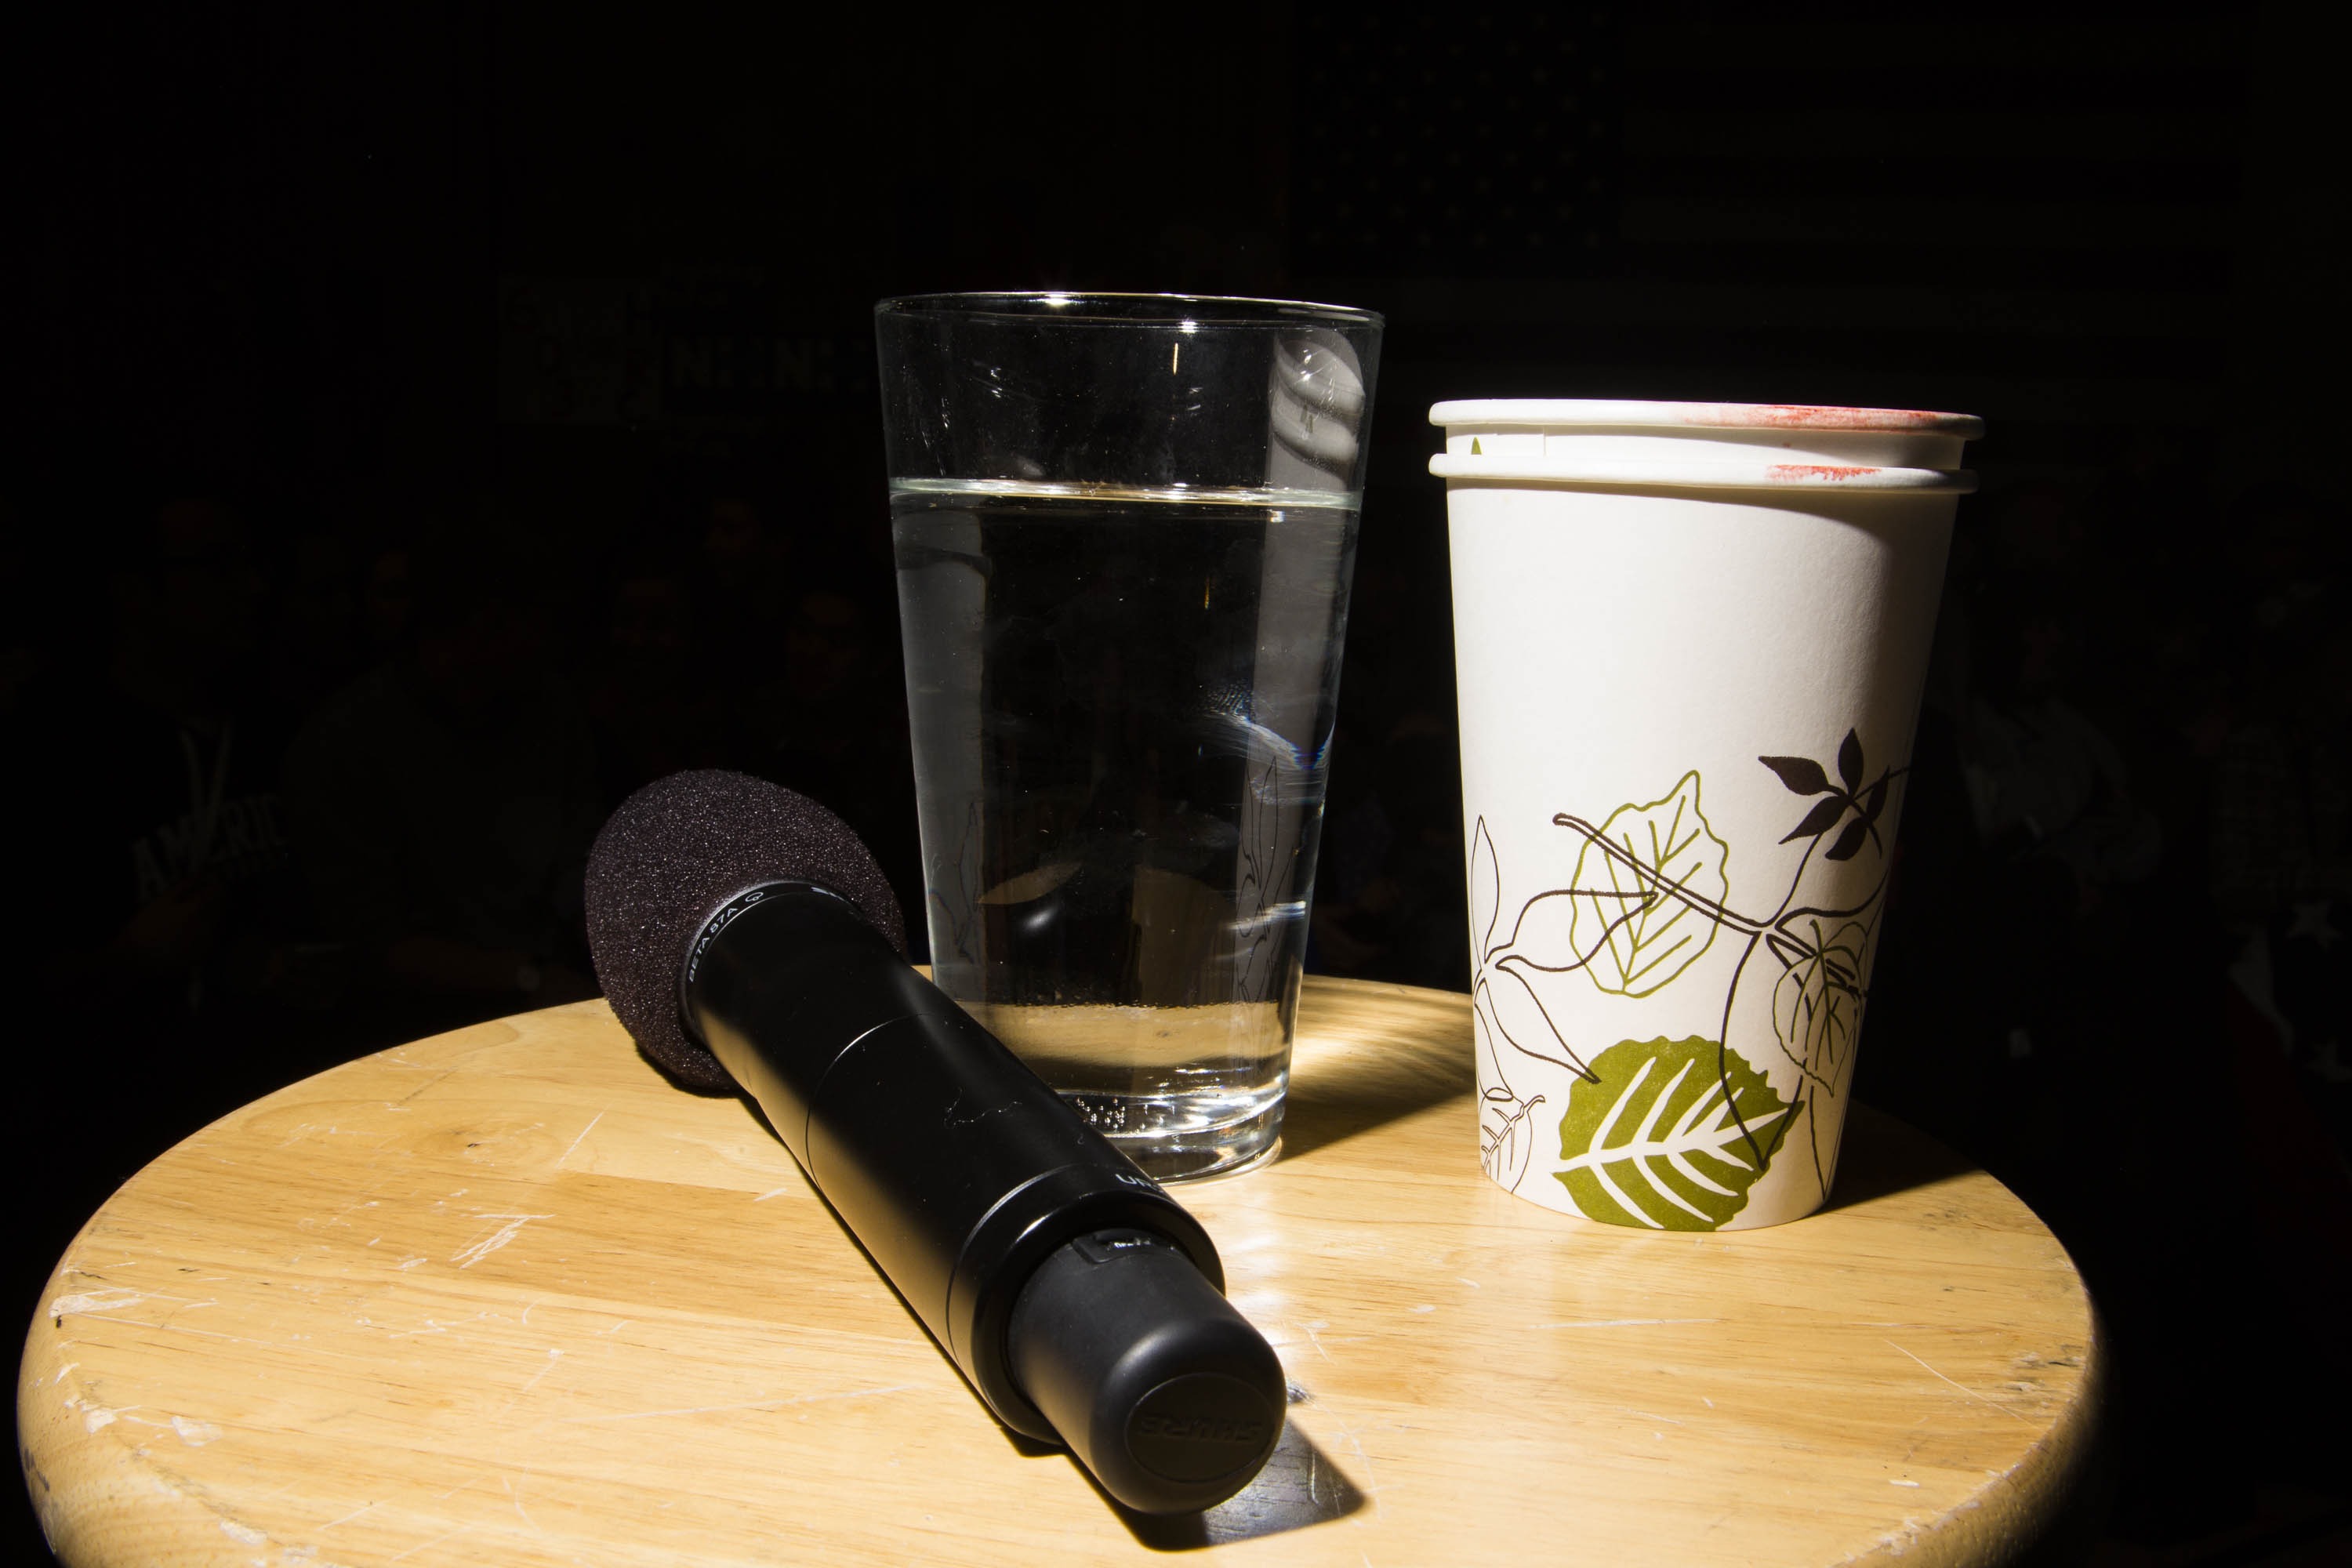 A microphone and cup used by Democratic presidential candidate, former Secretary of State Hillary Clinton sit on a stool during a campaign event at Rundlett Middle School on Feb. 6, 2016, in Concord, N.H.